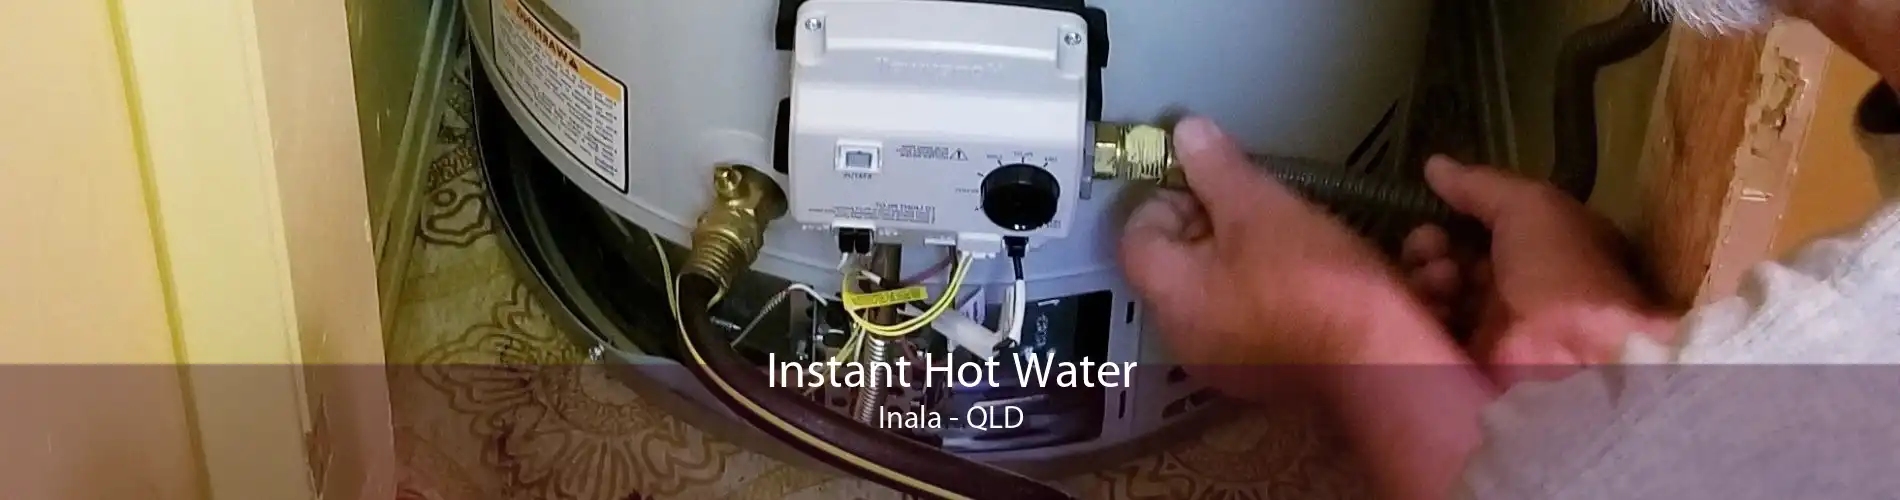 Instant Hot Water Inala - QLD